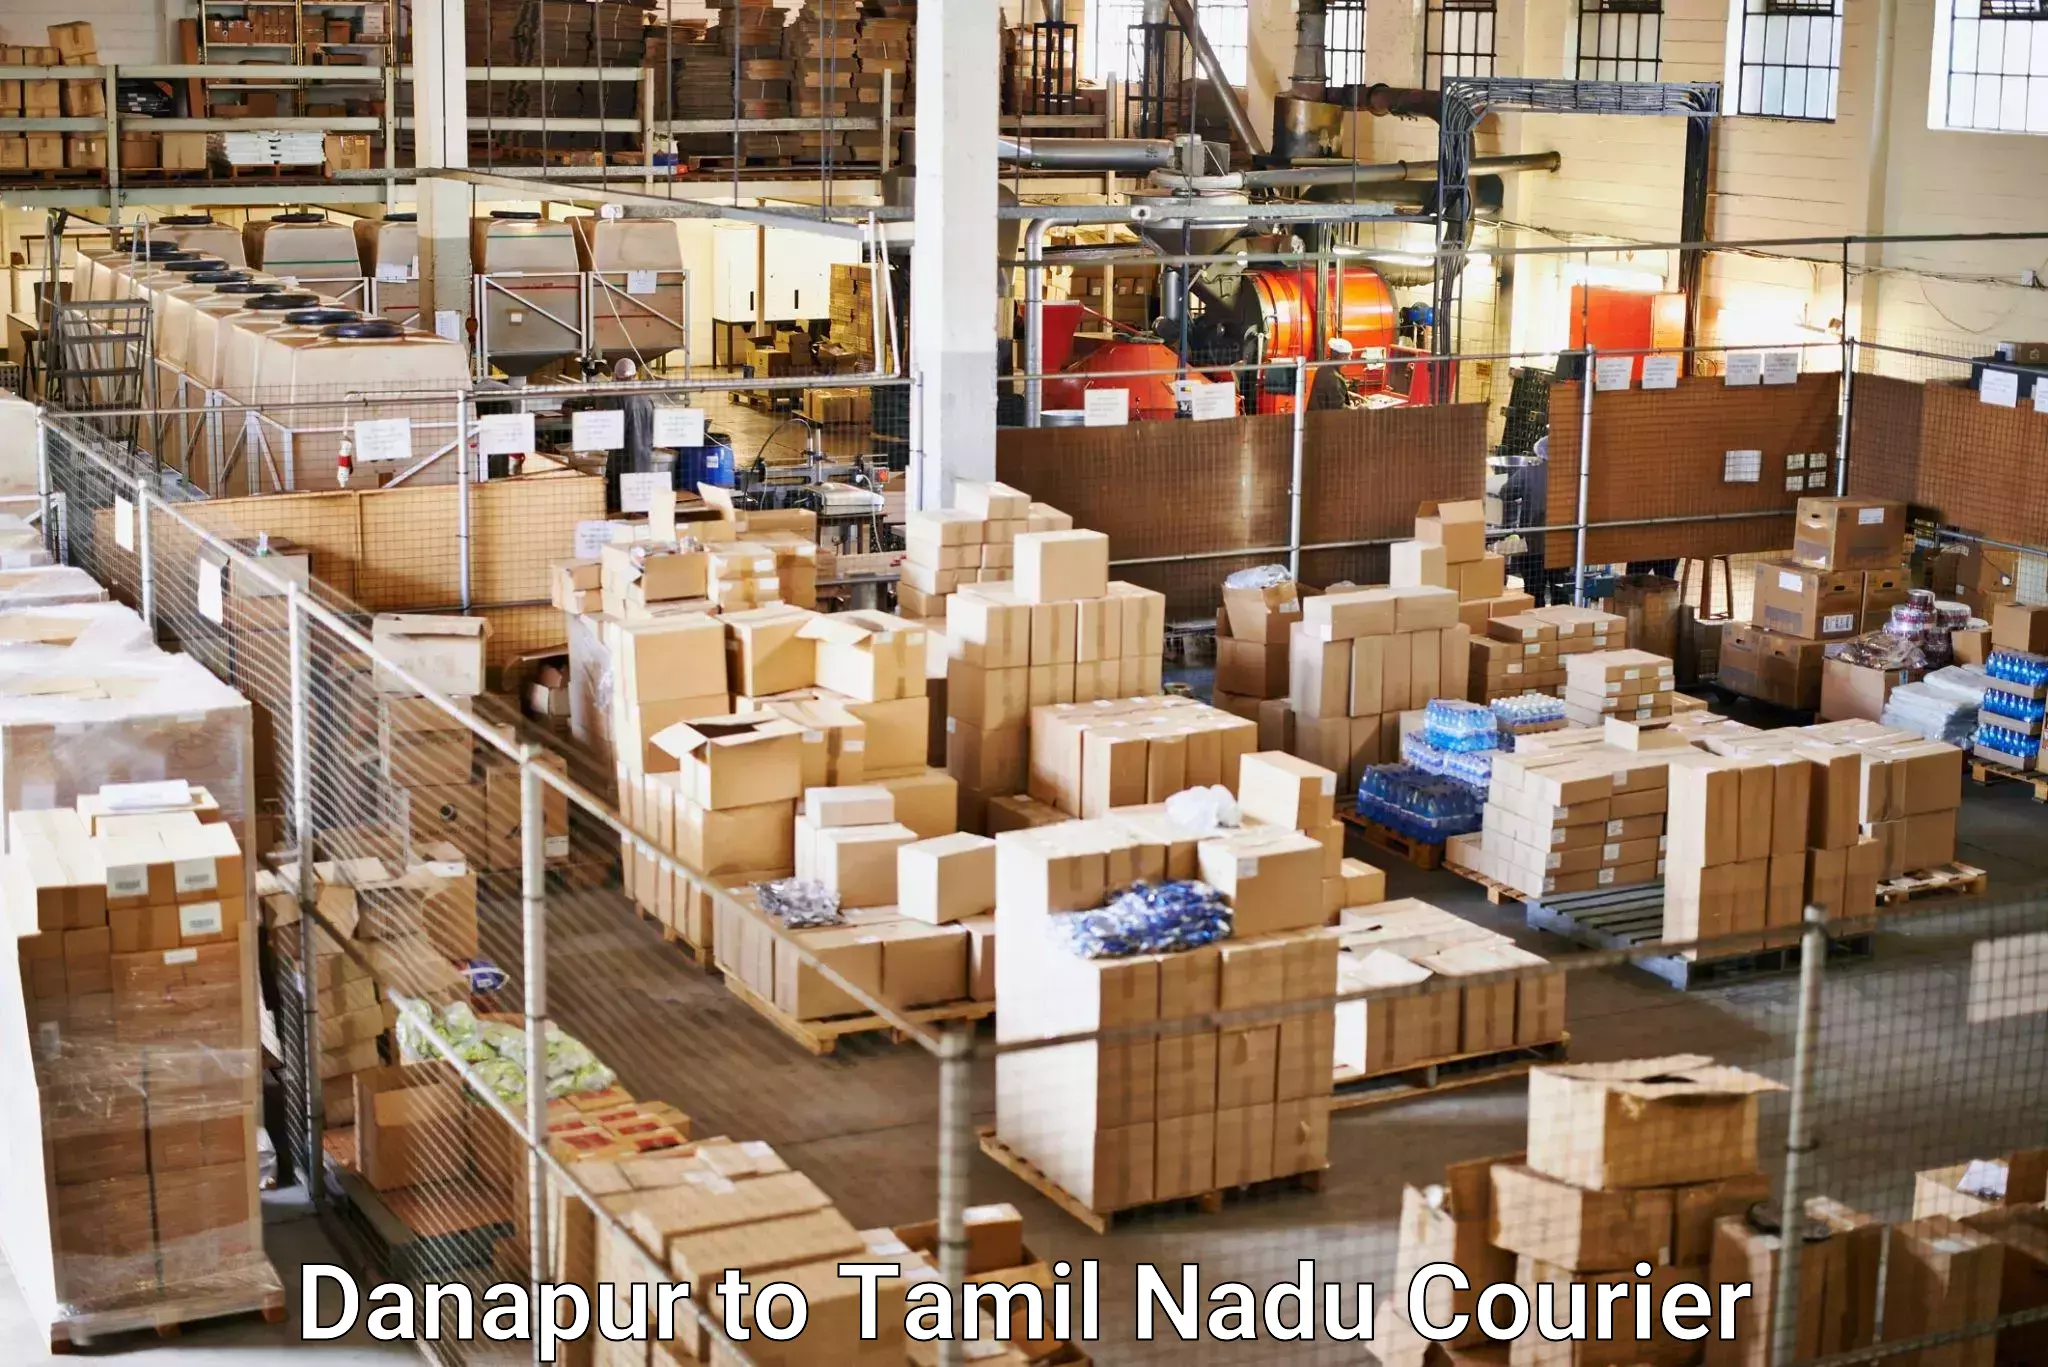 Reliable delivery network Danapur to Ambattur